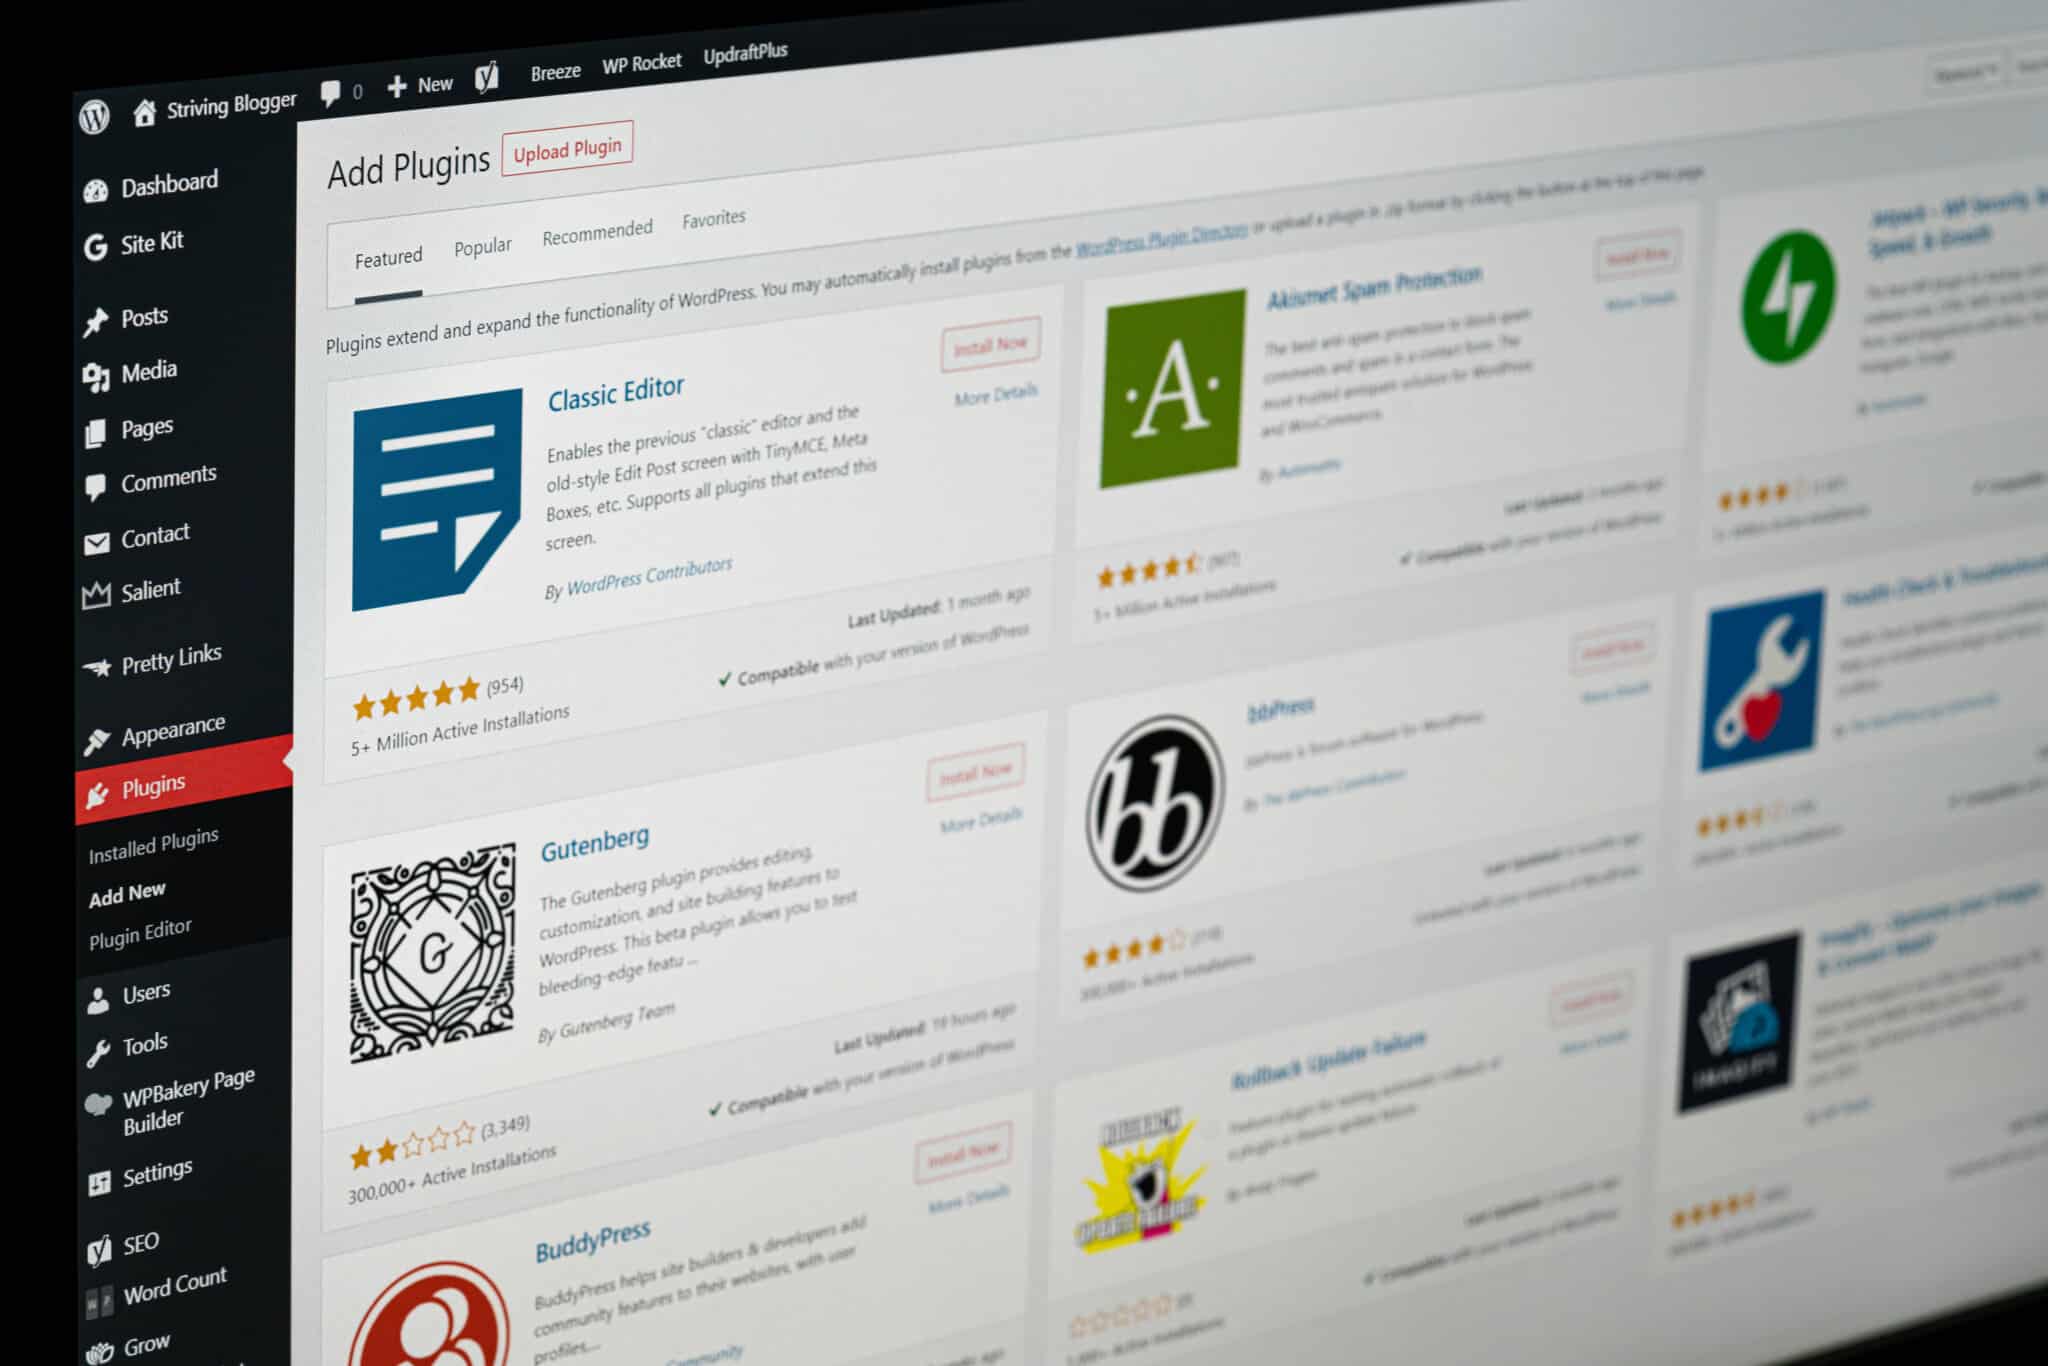 WordPress plugin dashboard for various editor featured options.